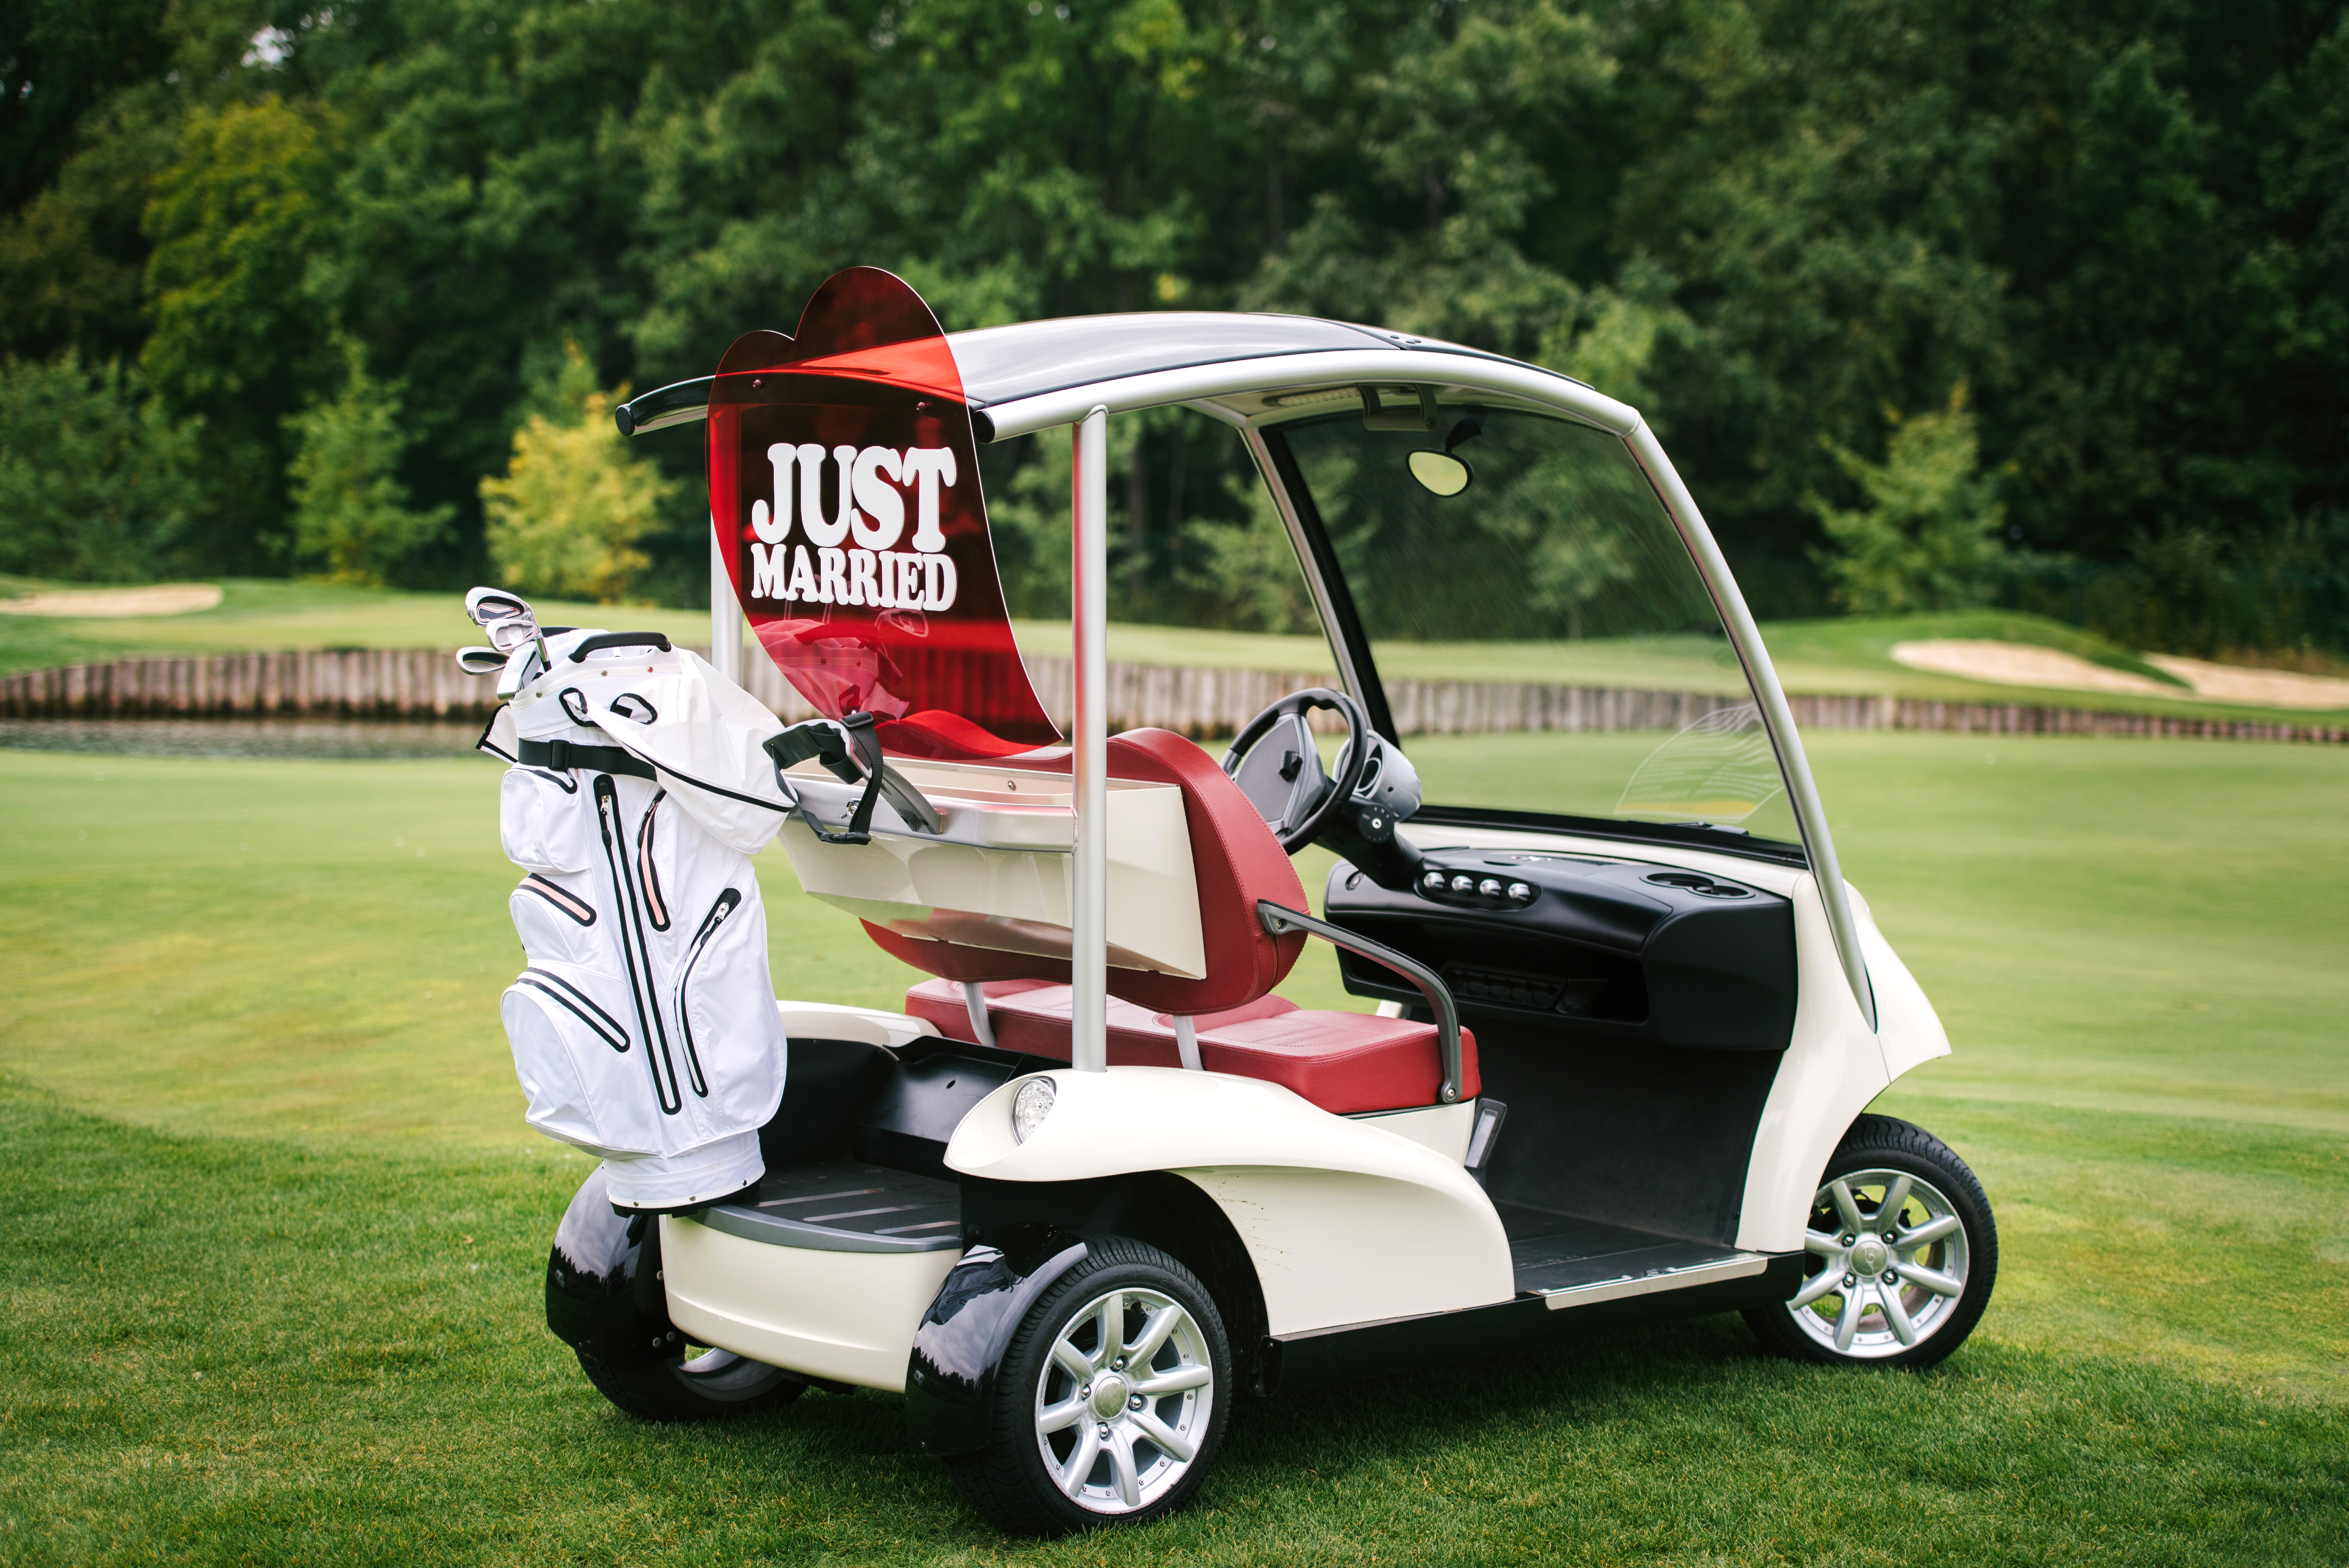 A golf cart with the words "Just Married" on the back | Source: Shutterstock